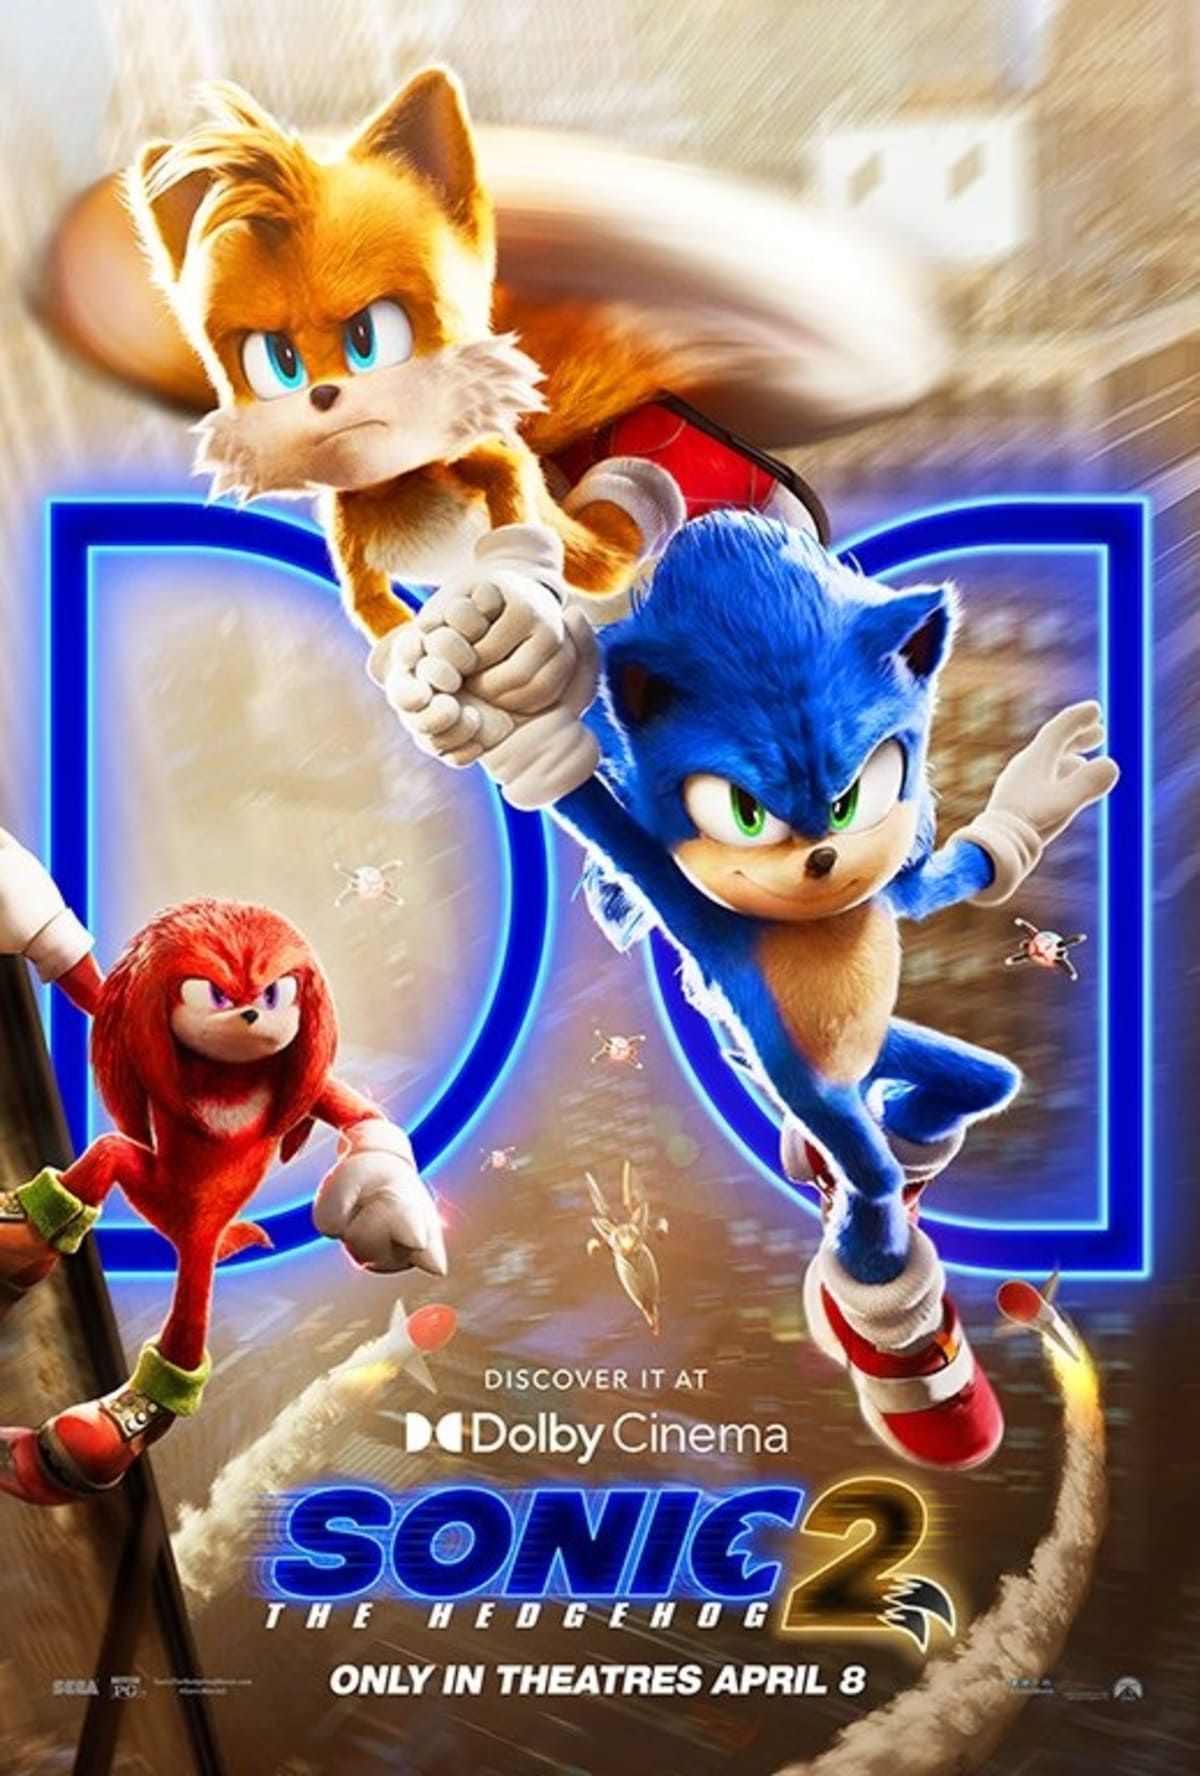 Sonic The Hedgehog 2 Dolby Poster Sees Knuckles Chasing Sonic And Tails